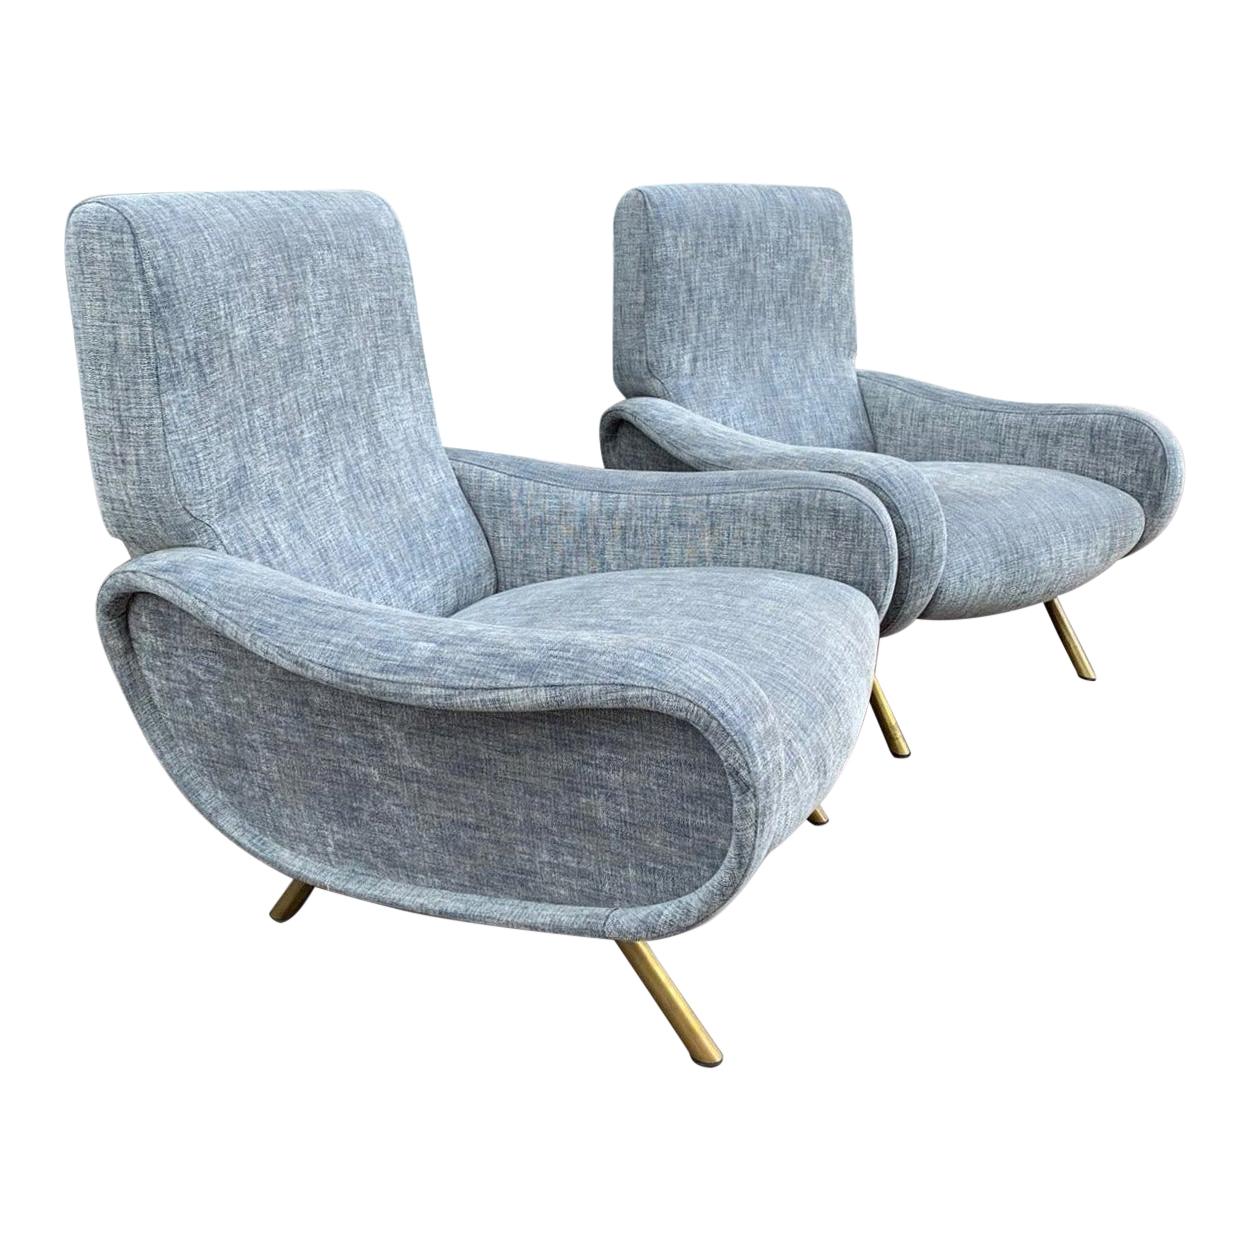 Pair of Blue Grey "Lady" Armchairs by Marco Zanuso, Italy, 1951